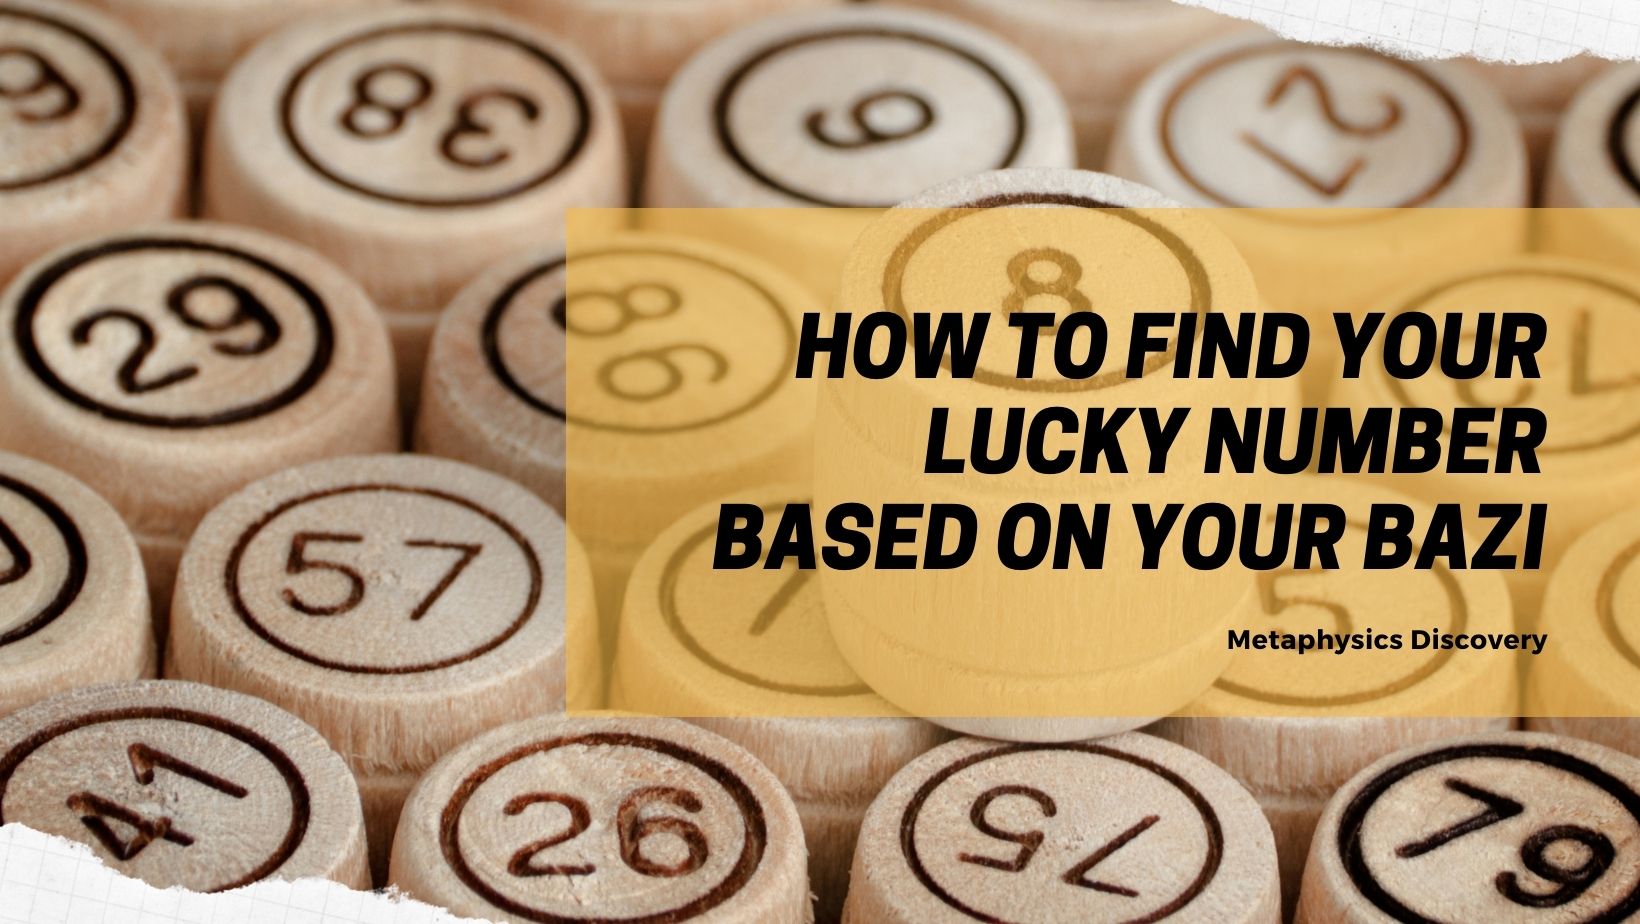 How To Find Your Lucky Number Based on Your Bazi